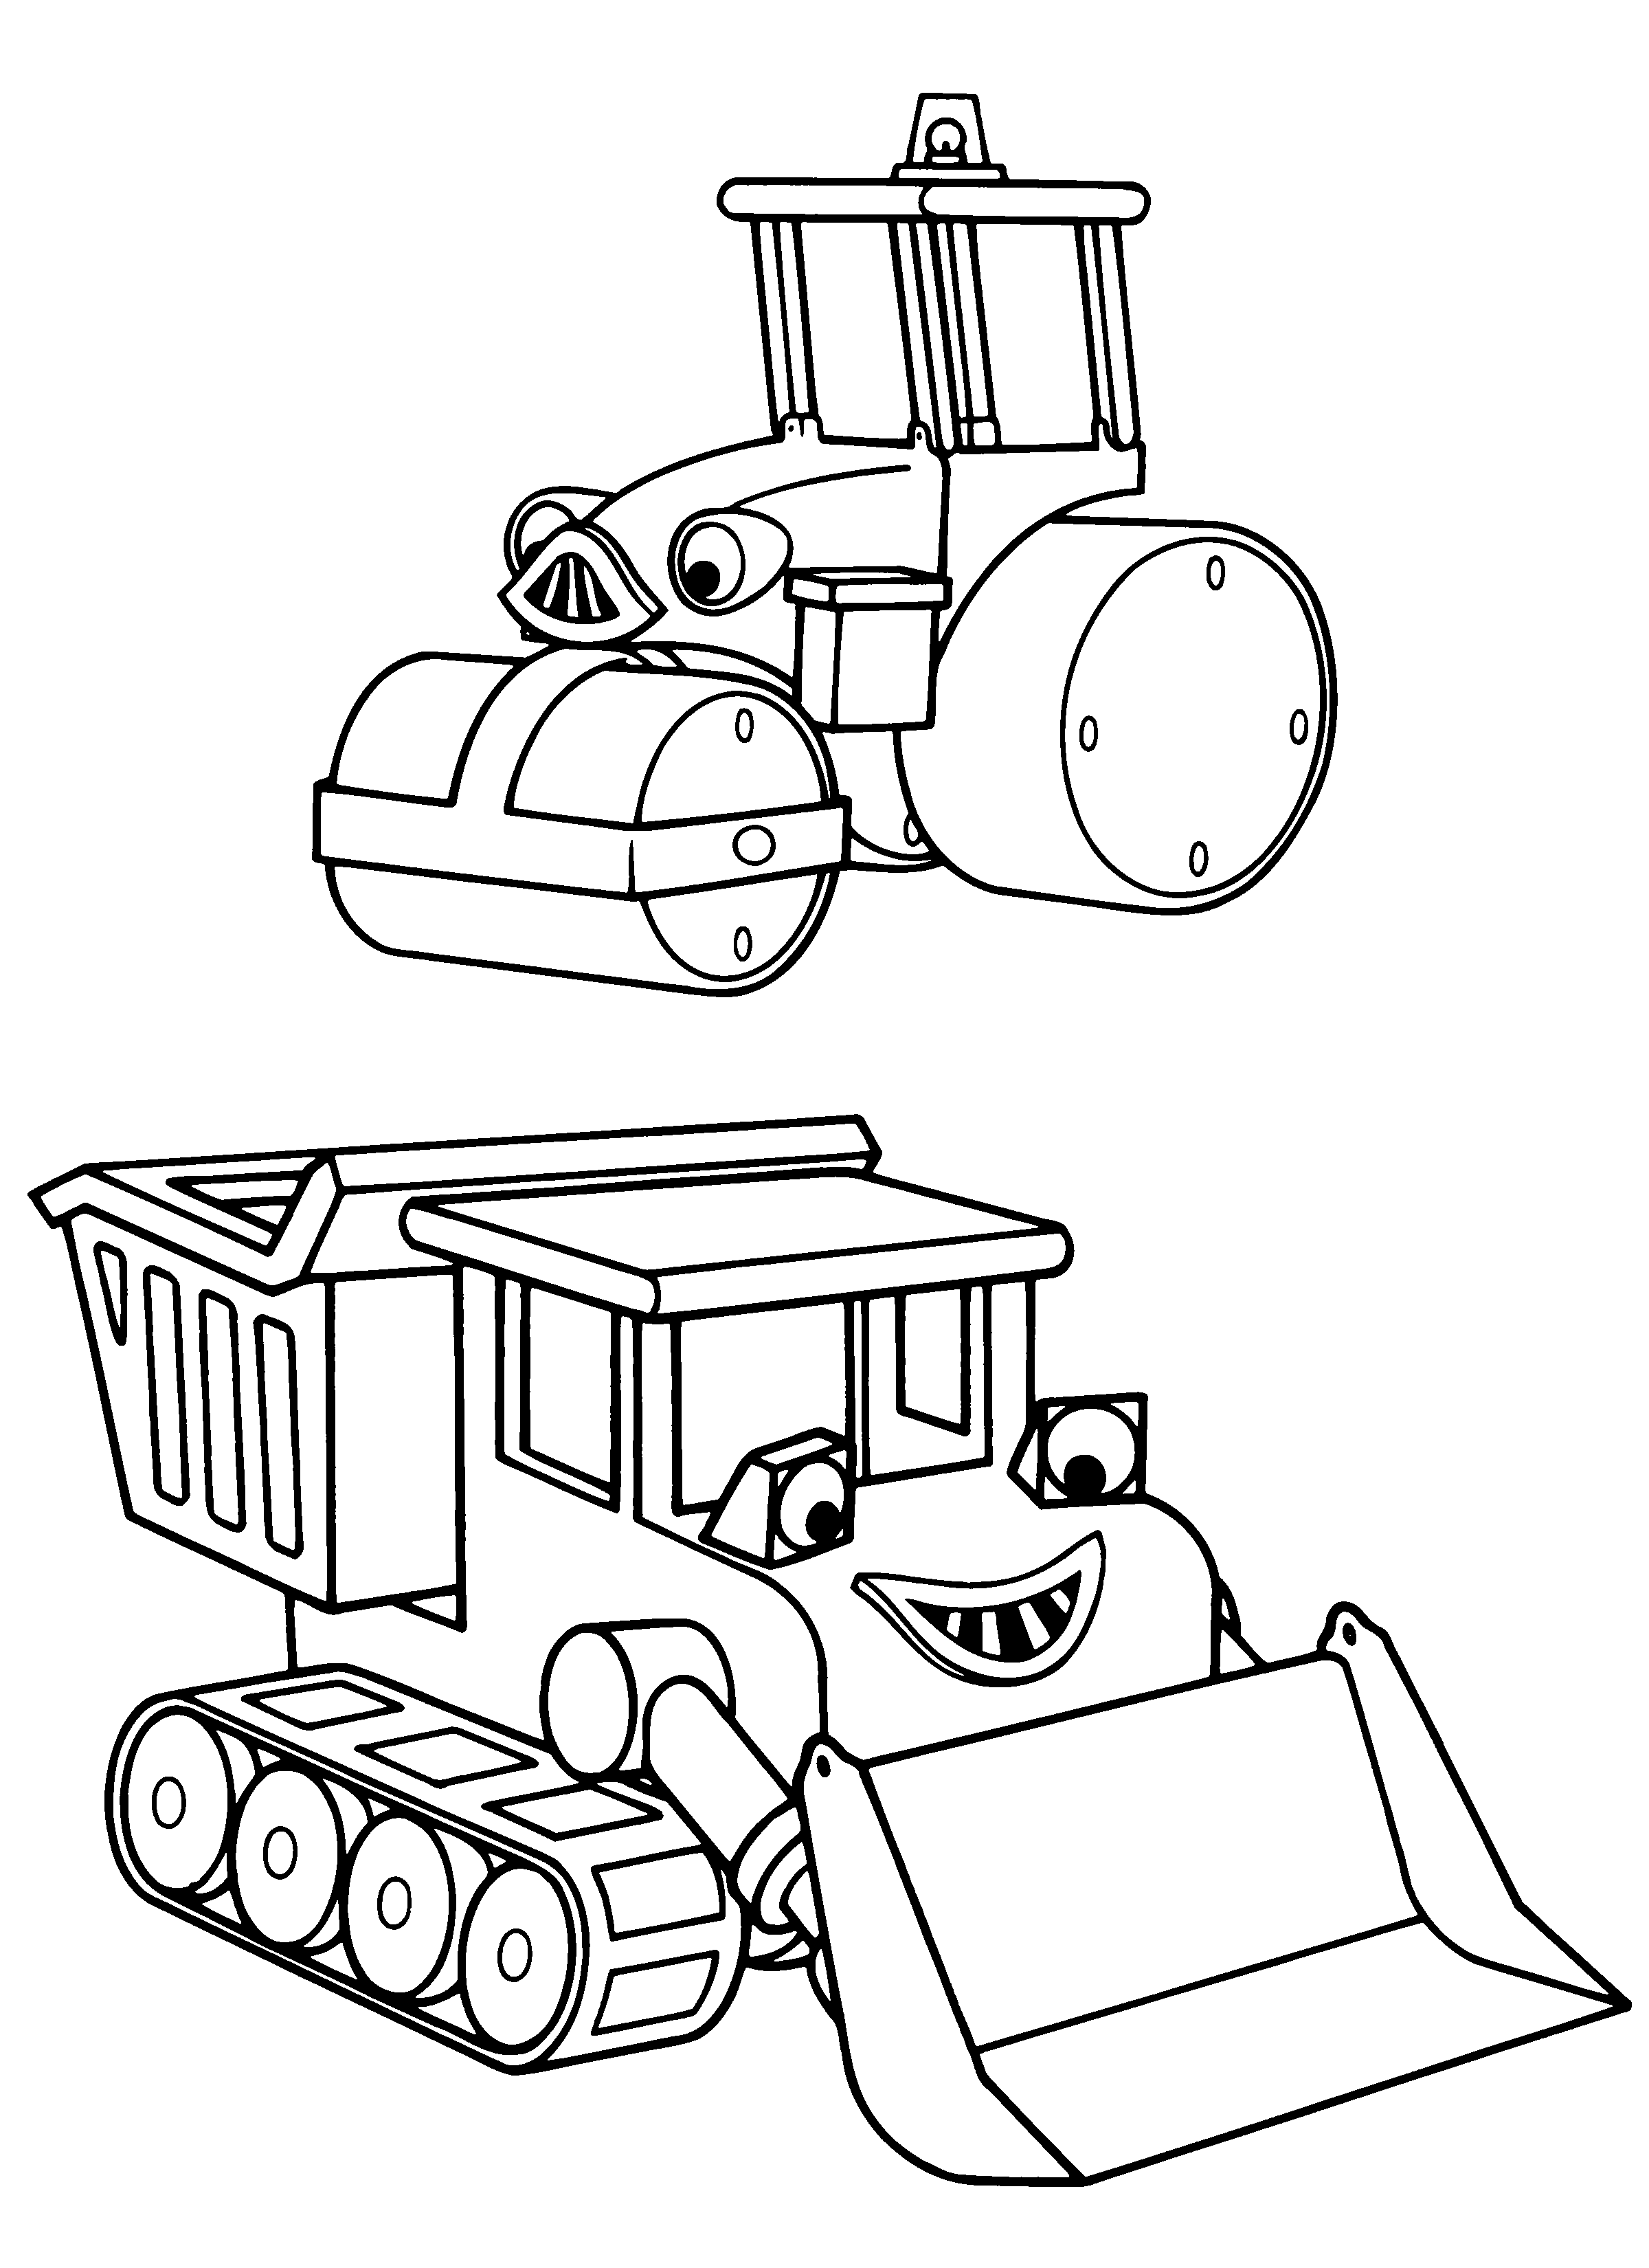 Coloring Page - Bob the builder coloring pages 44